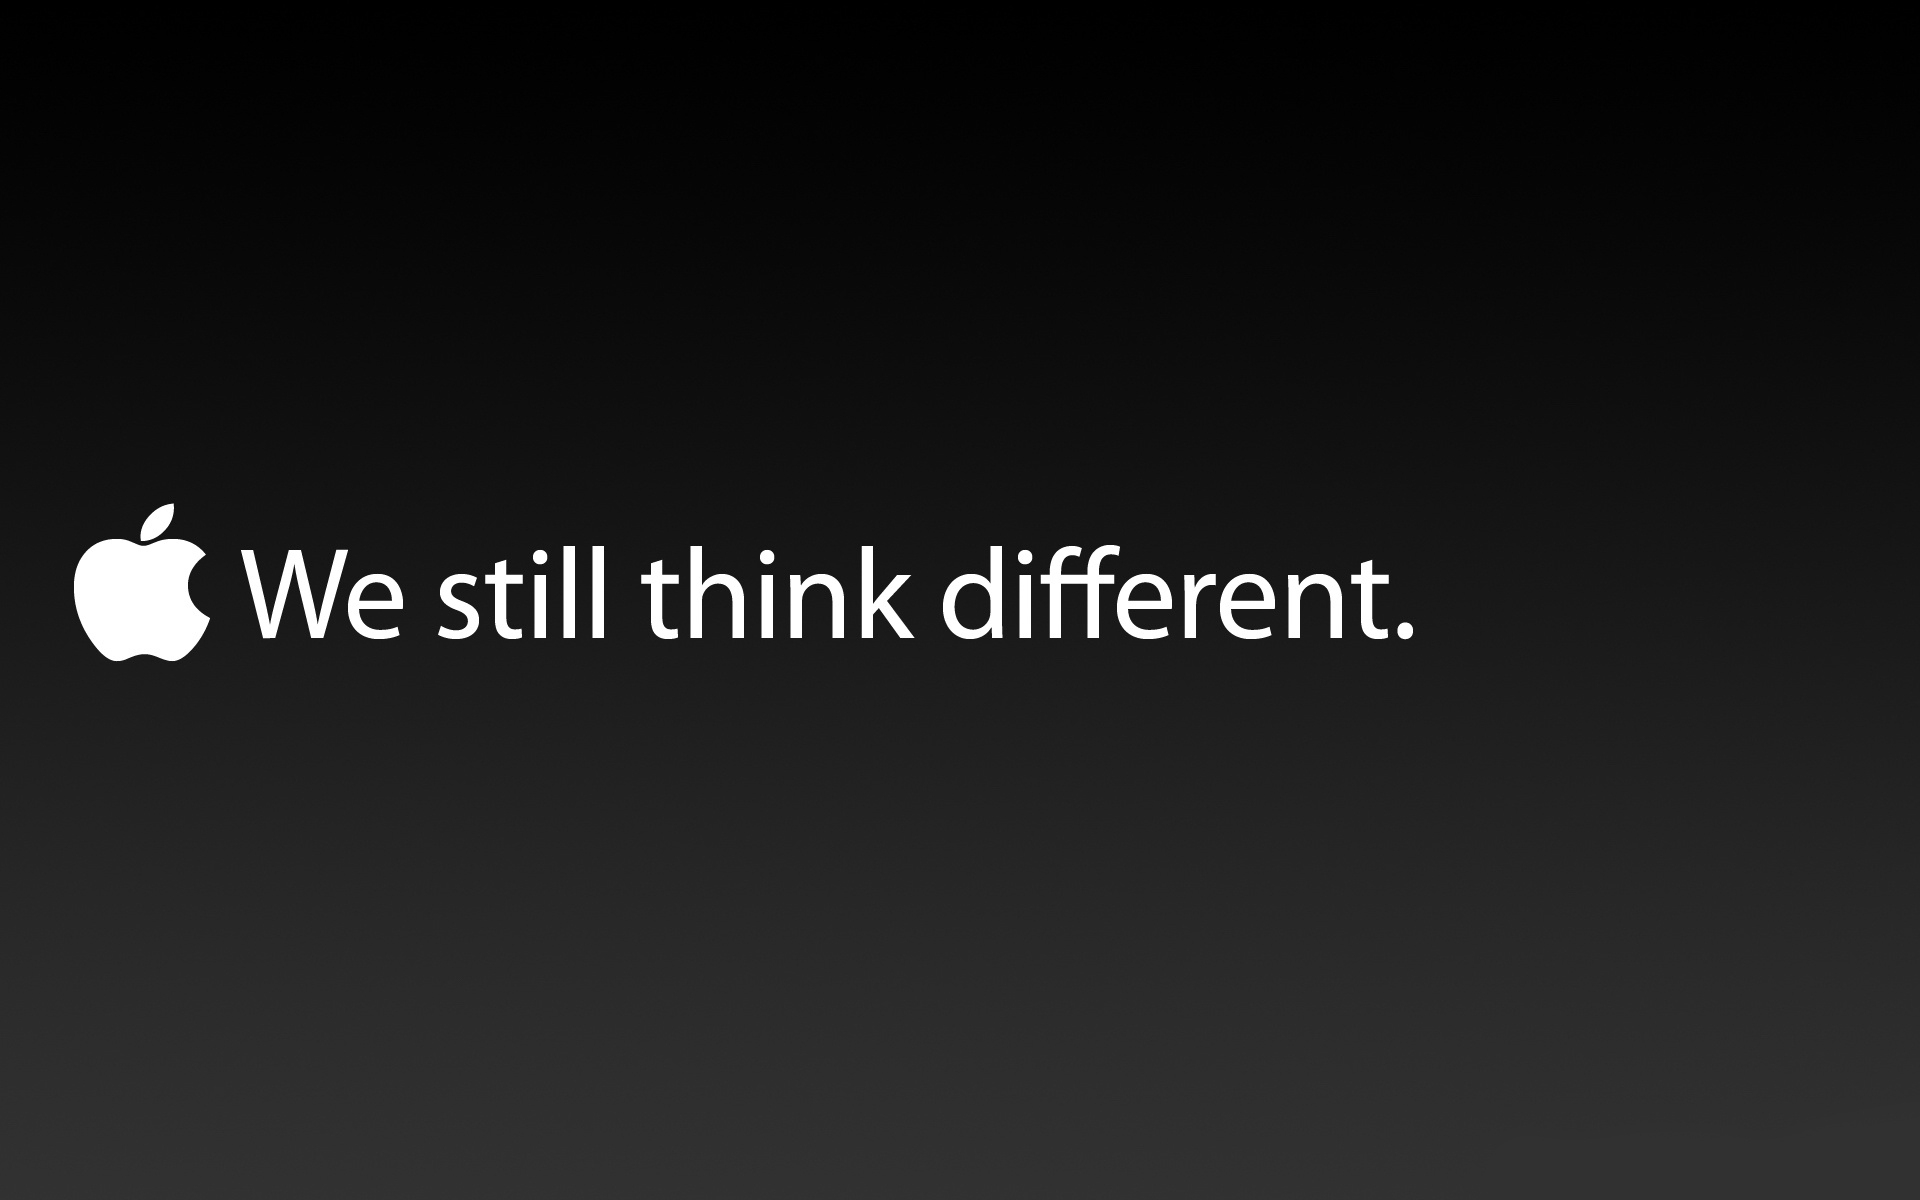 They Think Different Hd Wallpaper Wallpaperfx